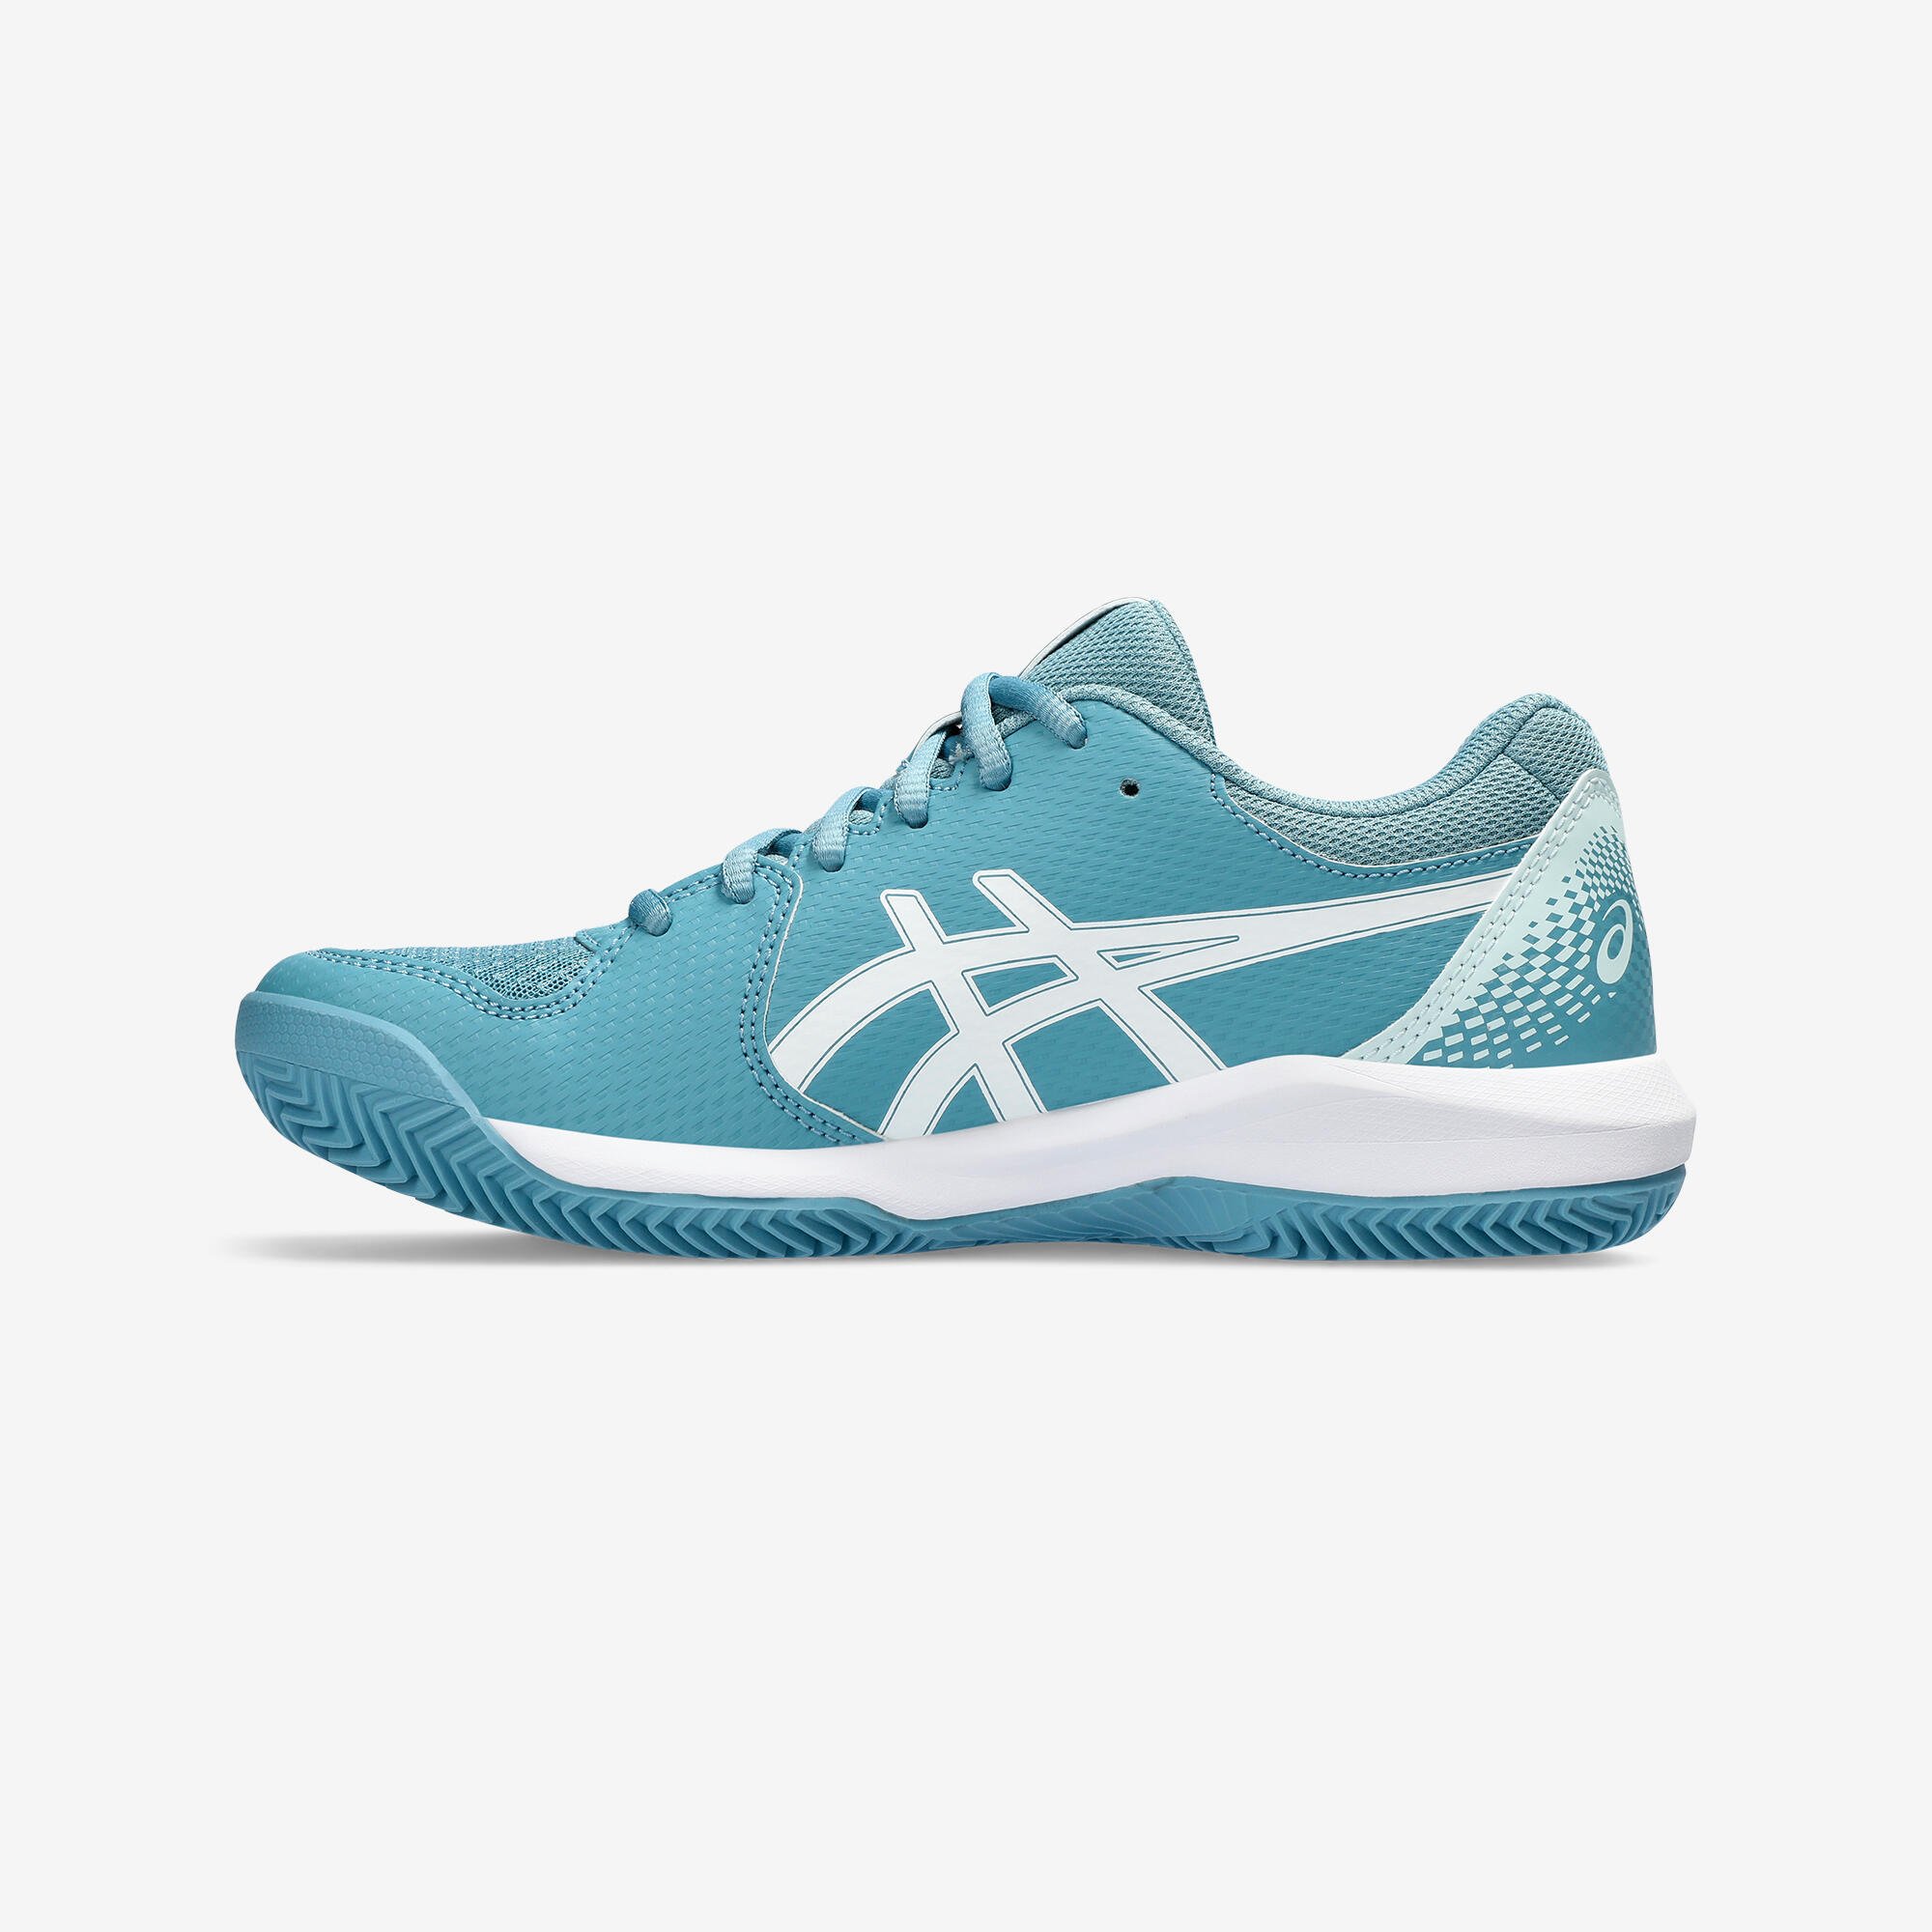 Women's Clay Court Tennis Shoes Gel Game Dedicate 8 - Turquoise Blue 2/6